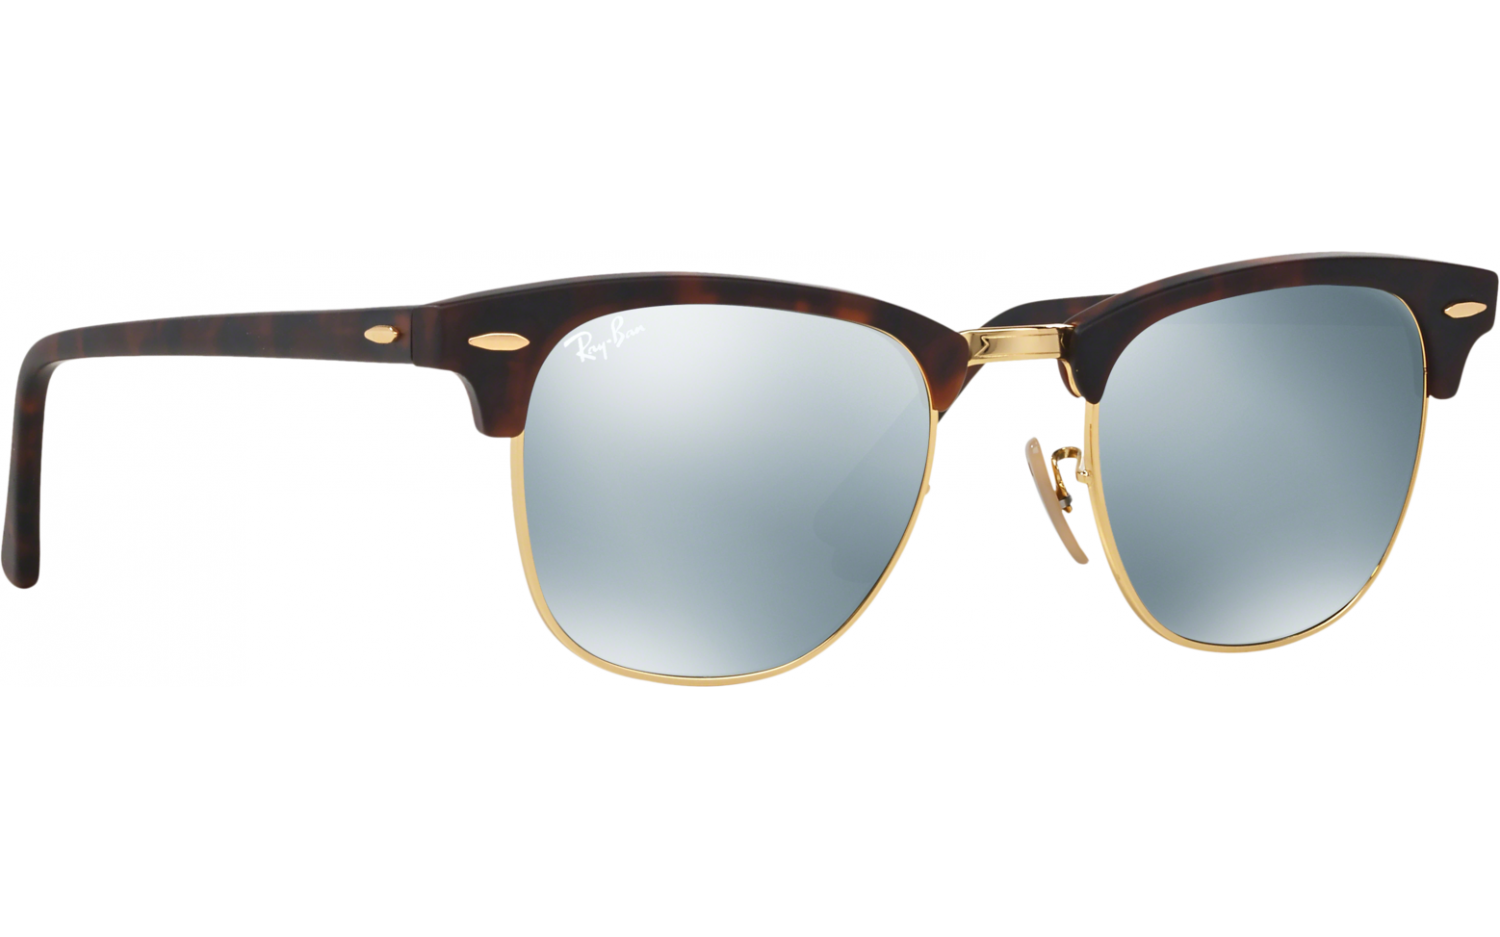 Ray-Ban Clubmaster RB3016 114530 51 Sunglasses | Shade Station